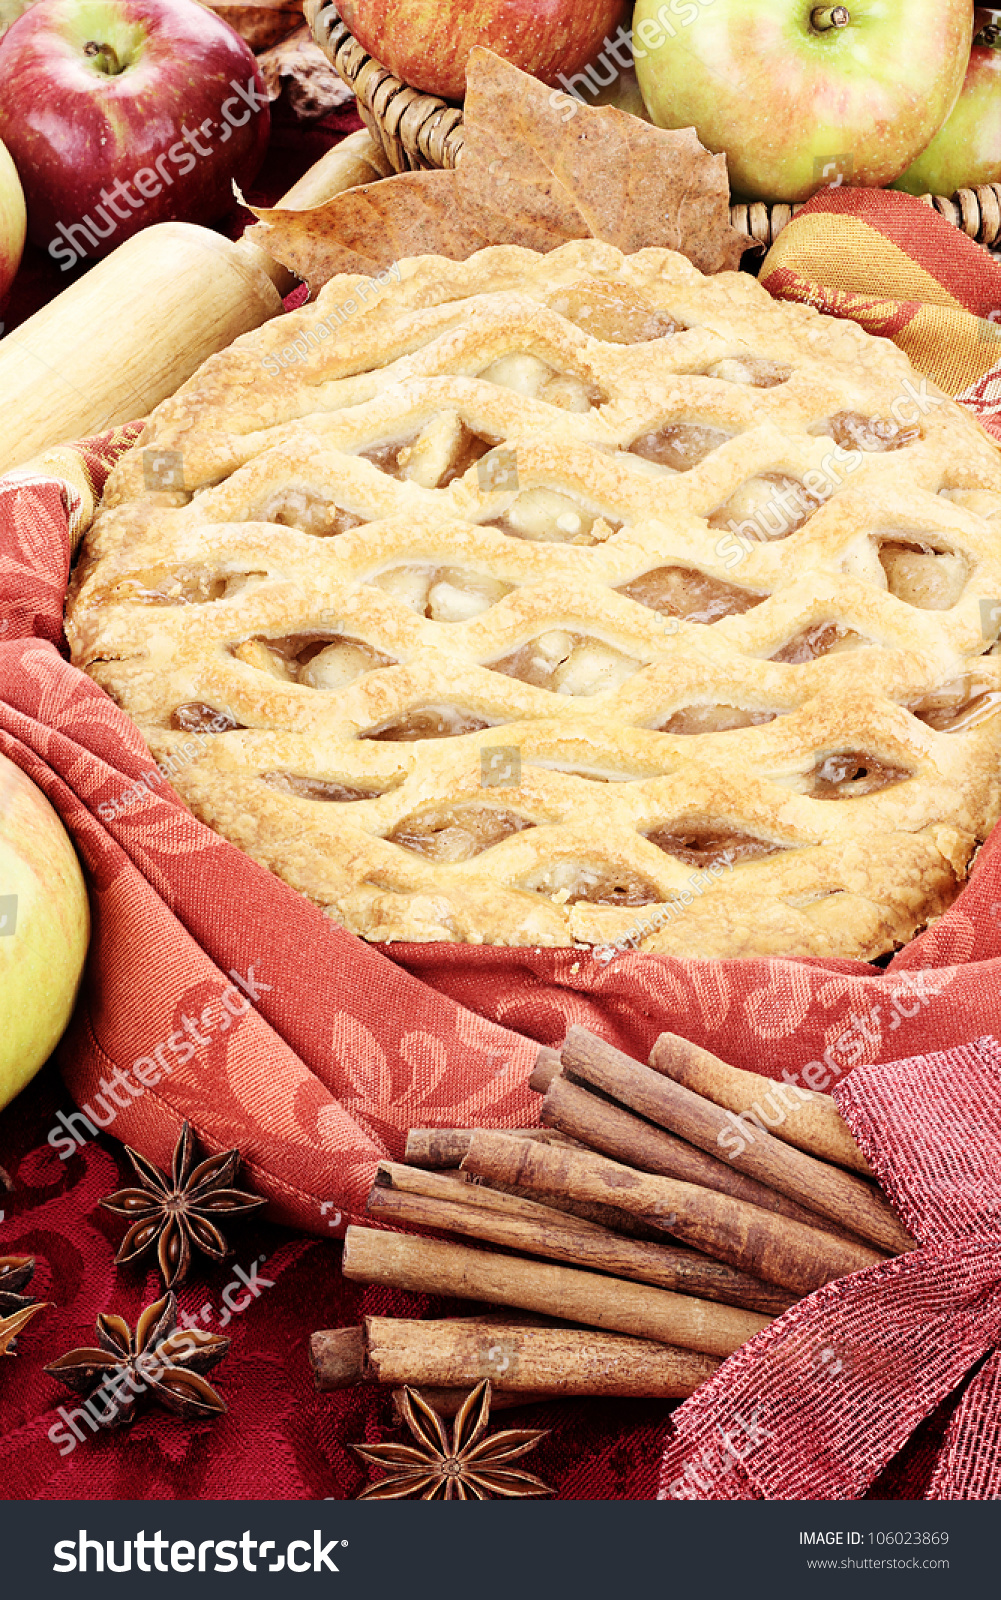 Fresh Baked Apple Pie Surrounded By Fall Leaves And Fresh ...